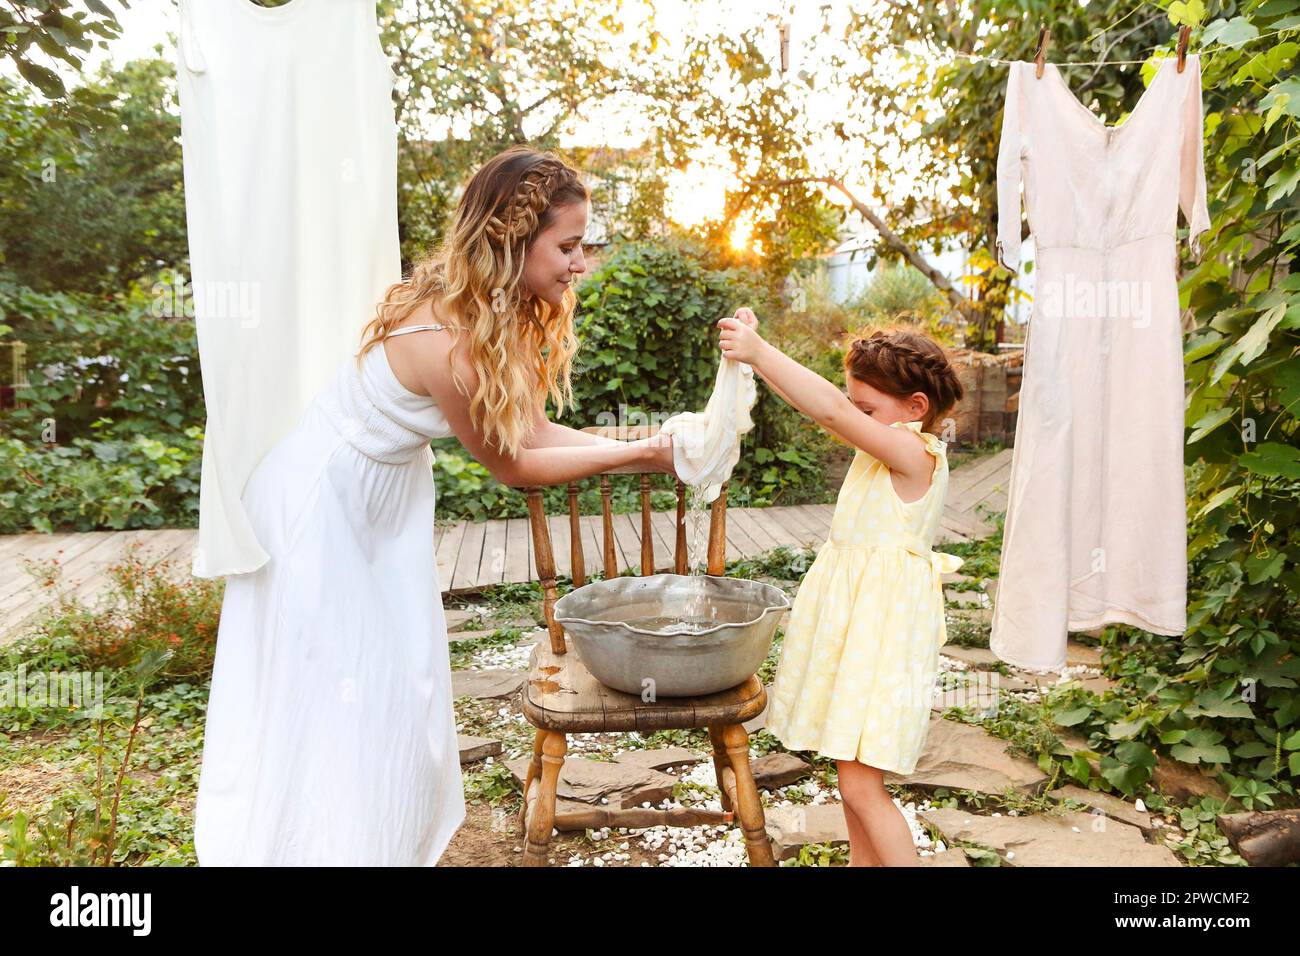 Charming little girl helping mother with wicker basket while doing chore and hanging laundry in backyard in summer evening Stock Photo